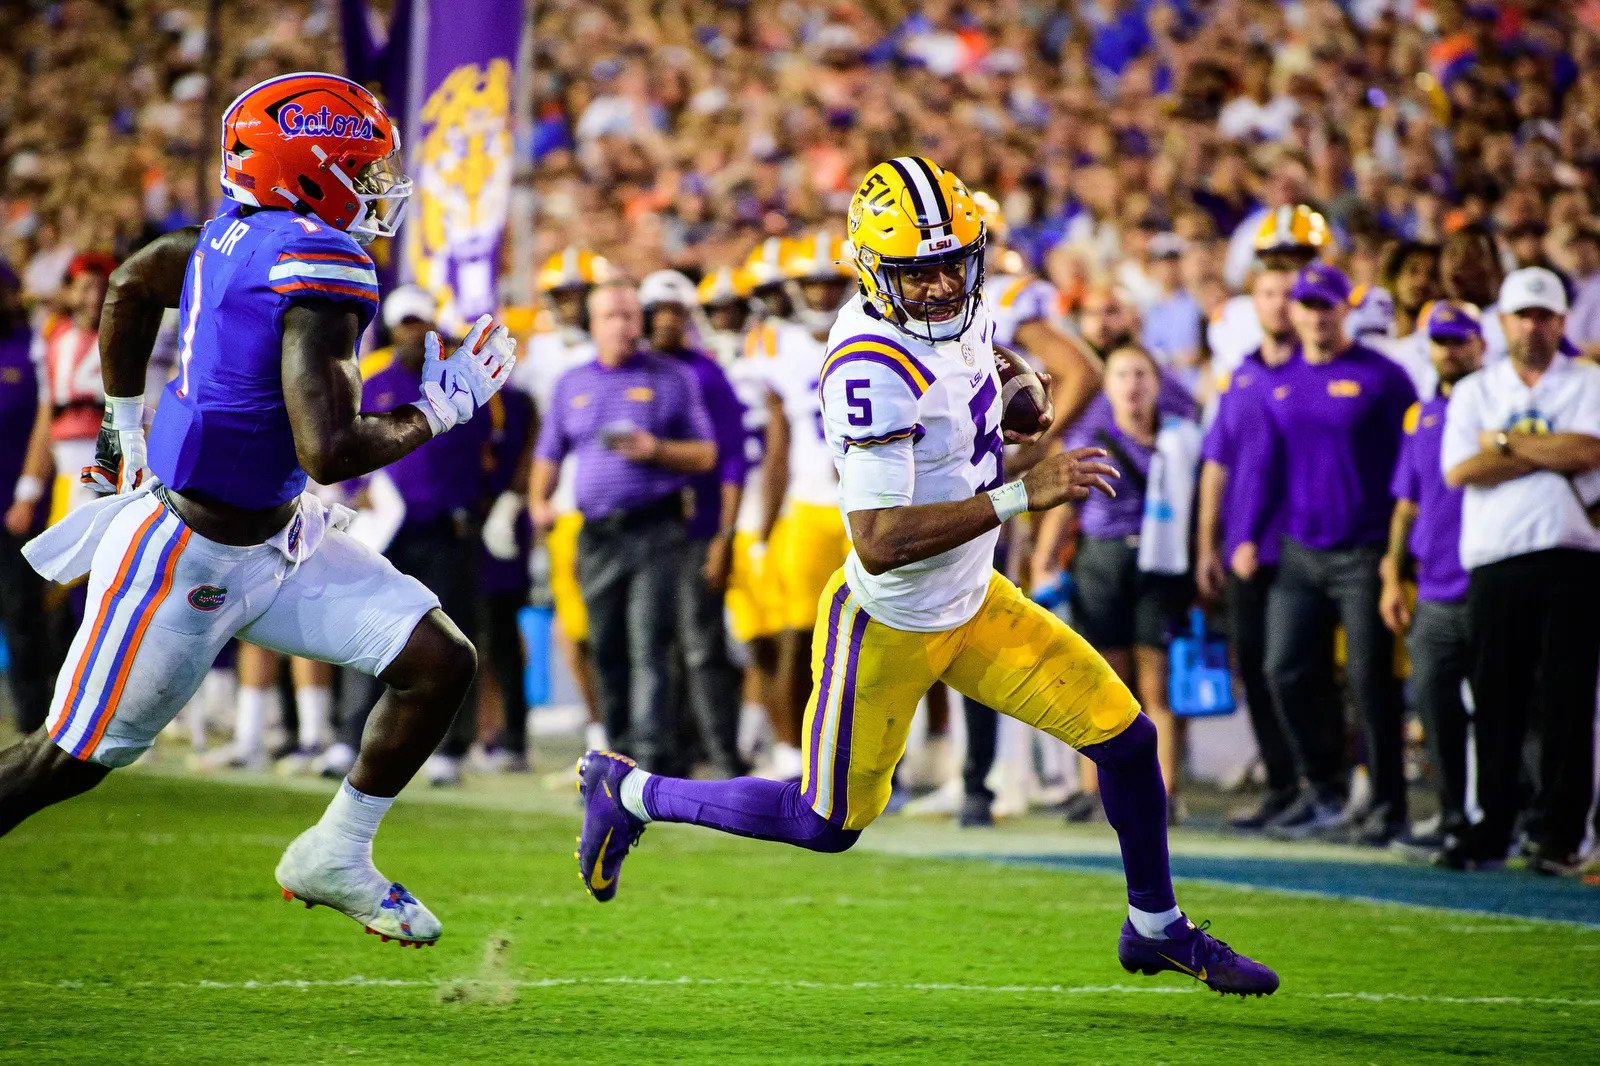 #4 Moment of 2022 Season: LSU’s Offense Shines On The Road Against Florida